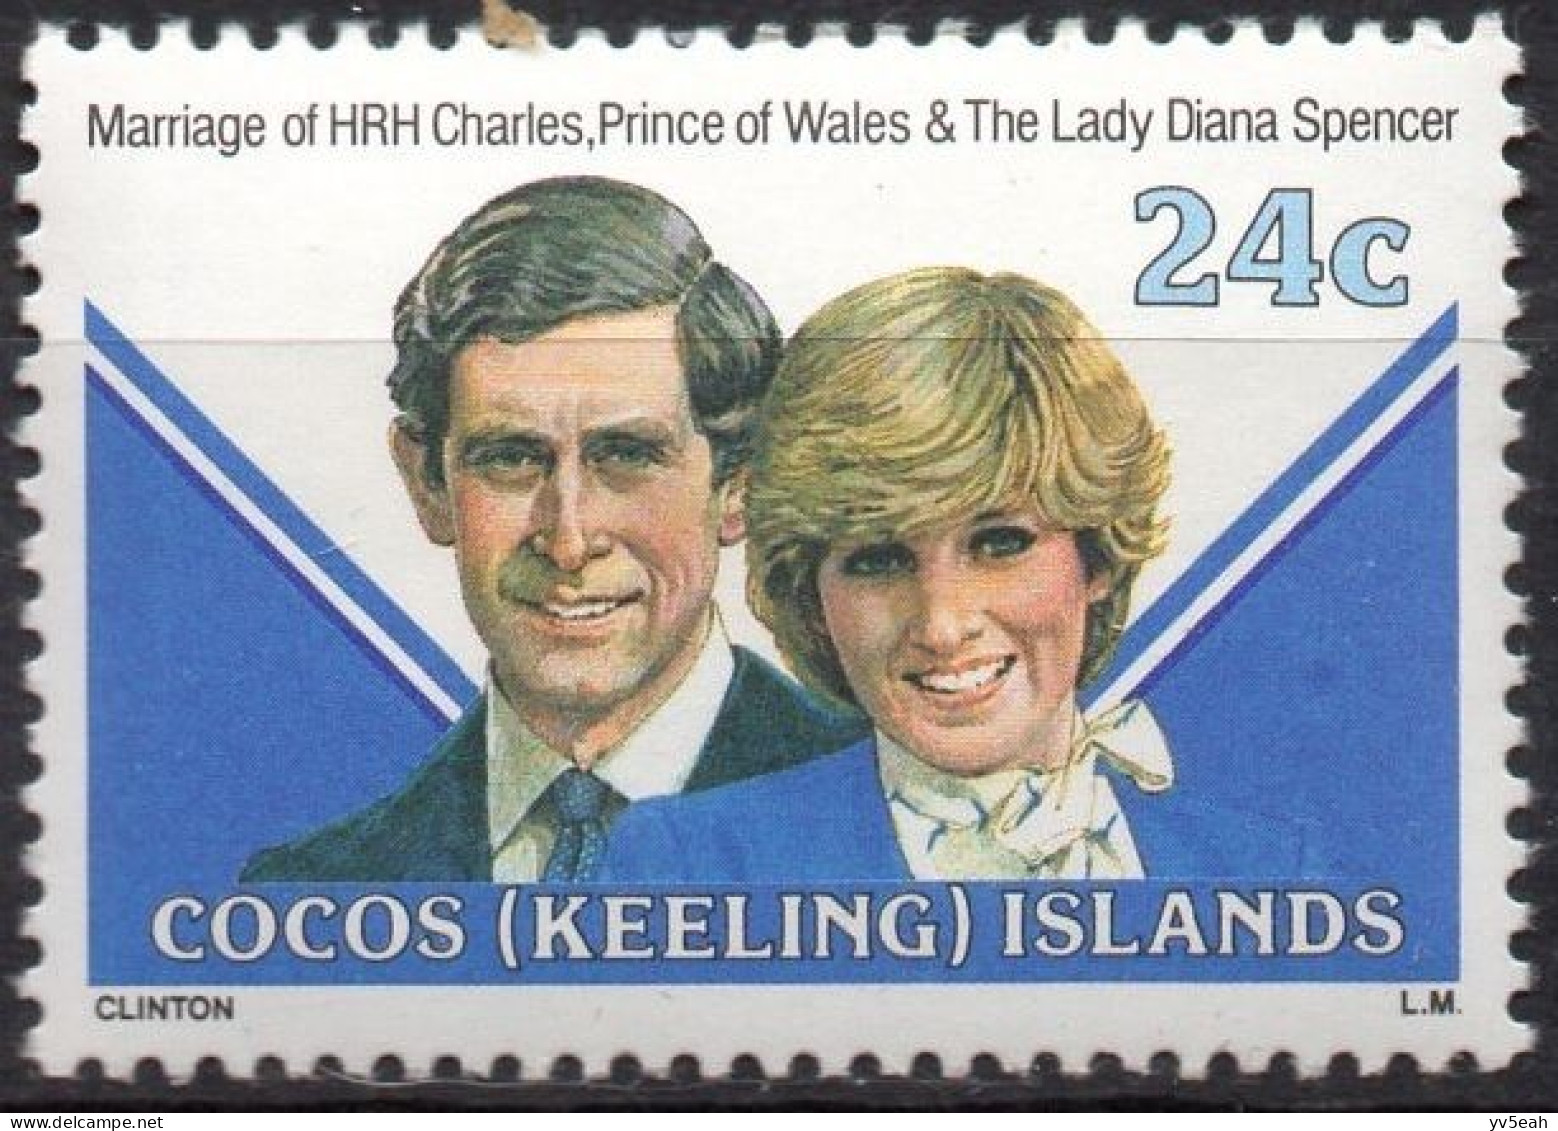 COCOS ISLANDS/1981/MNH/SC#73/ PRINCE CHARLES AND LADY MARRIAGE / 24c - Islas Cocos (Keeling)